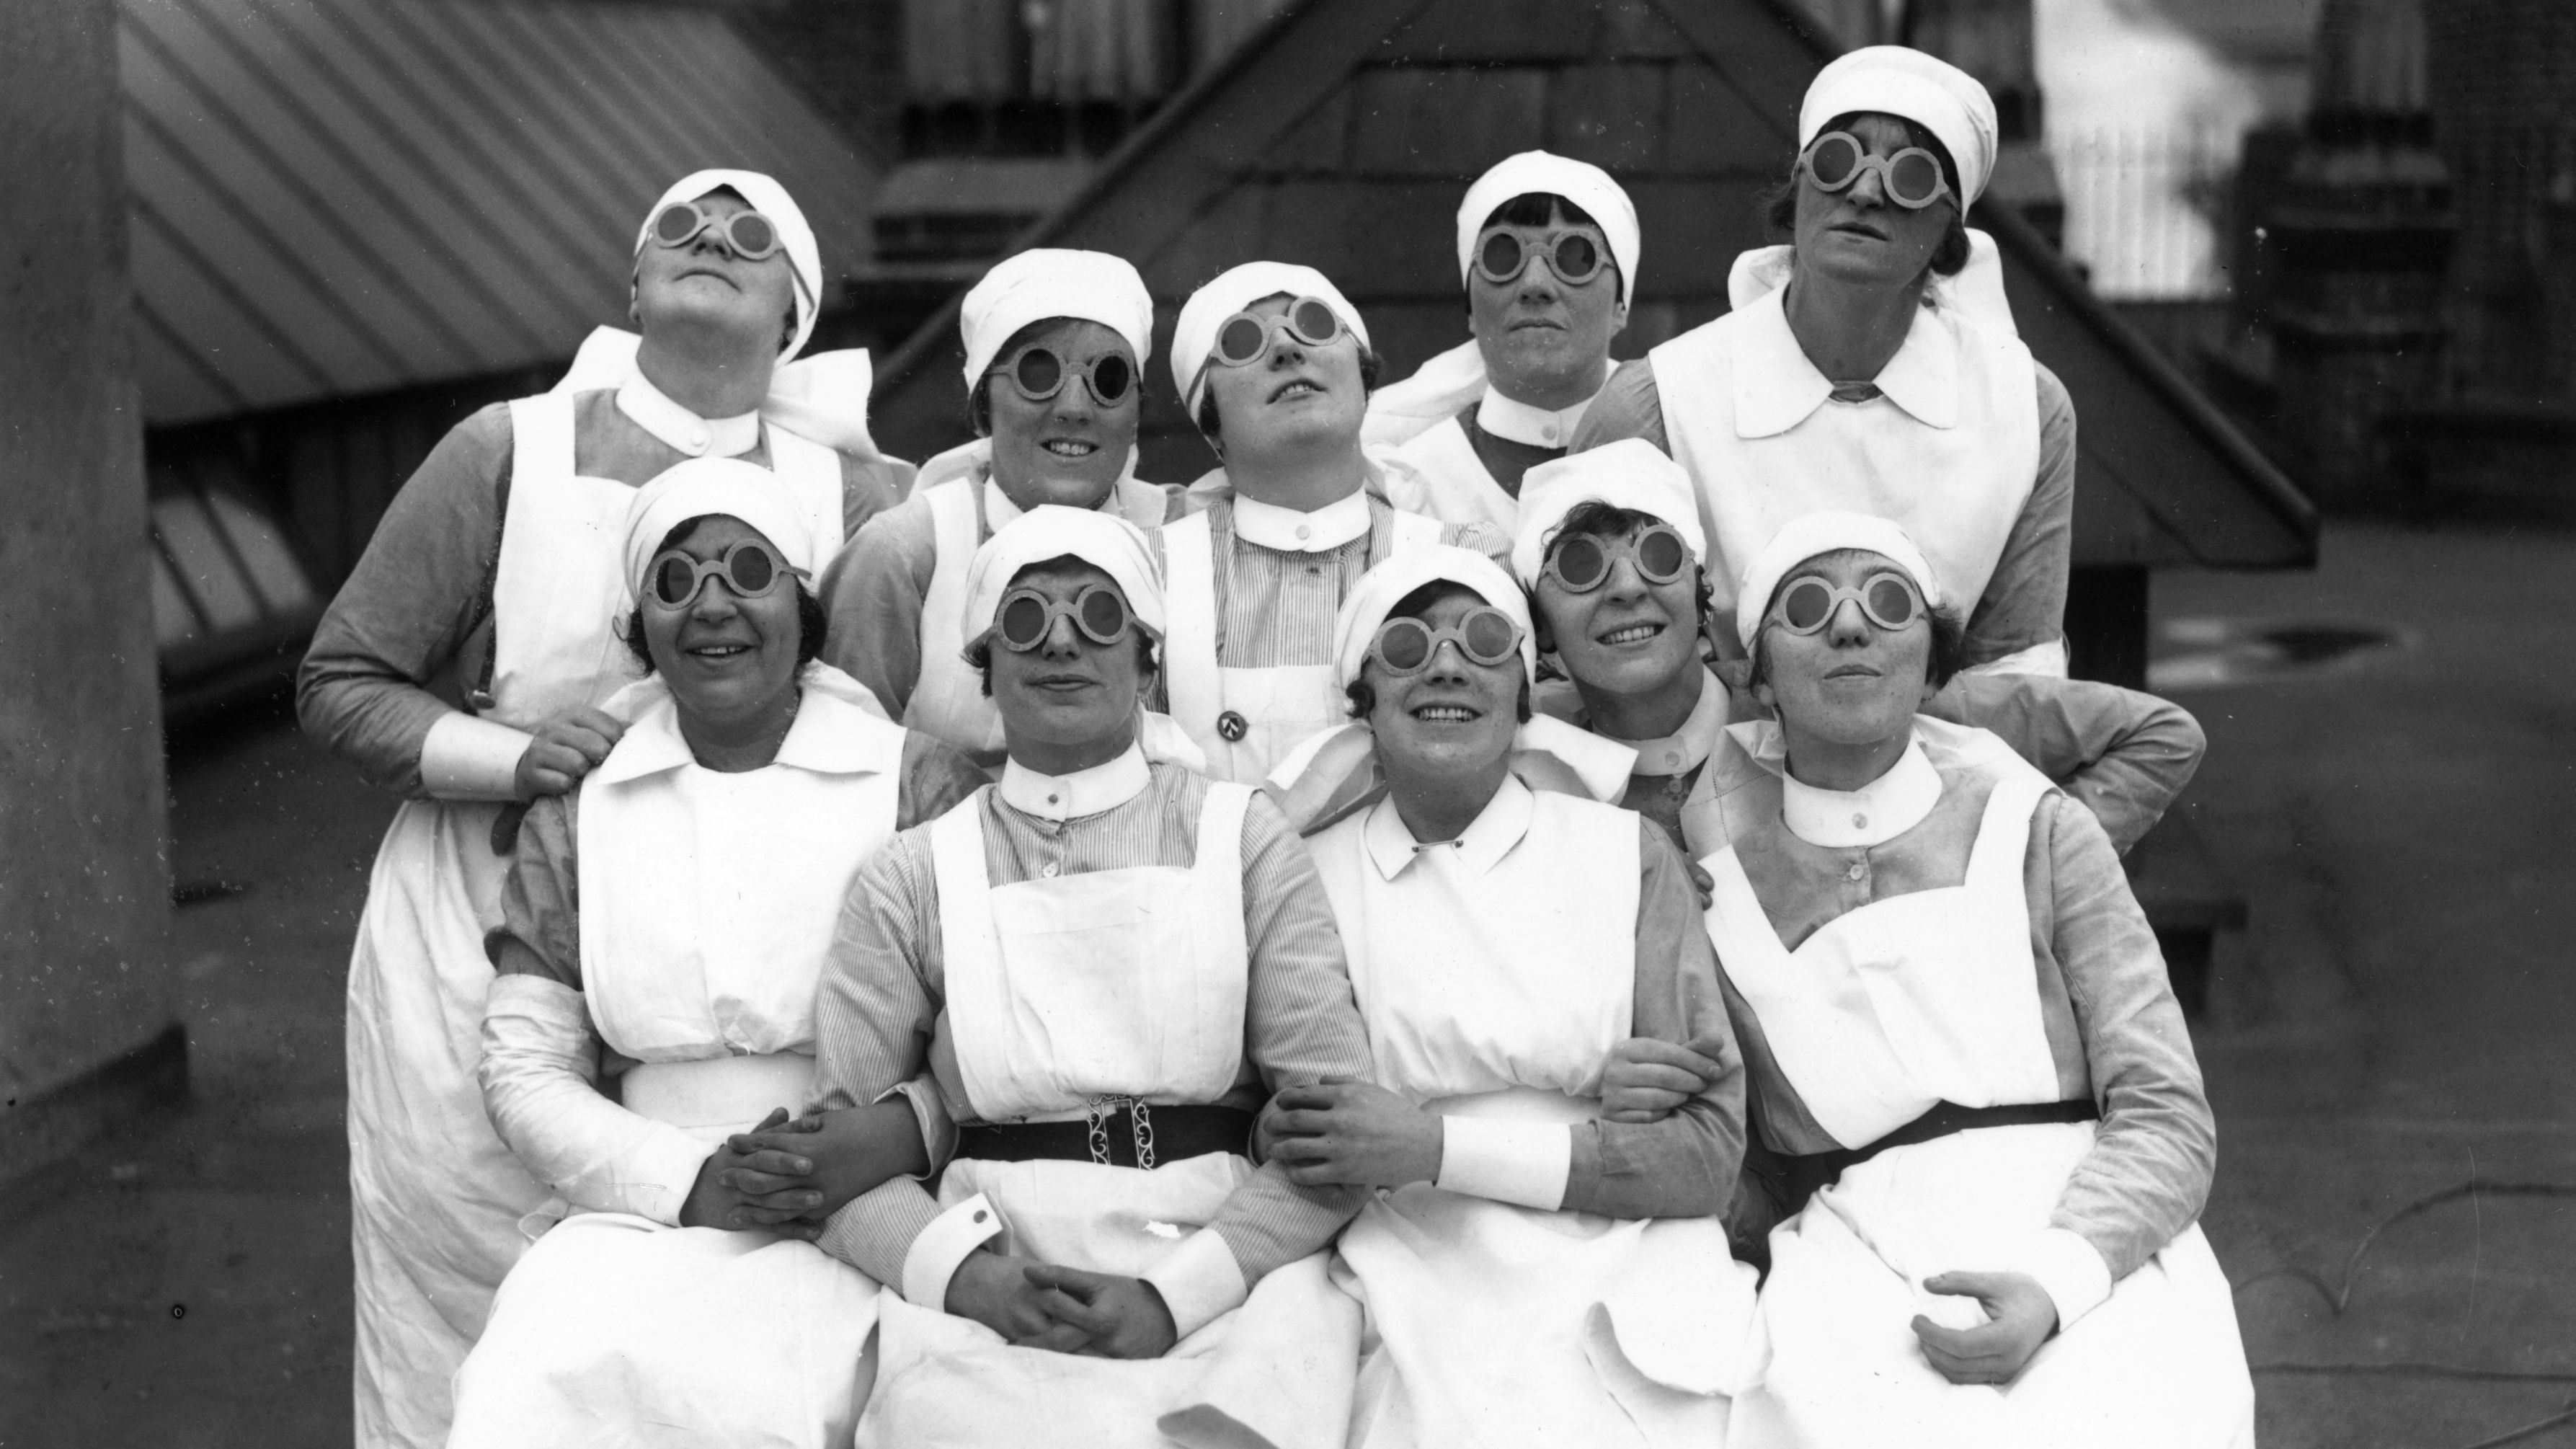 In June 1927 a group of nurses gathered to watch a solar eclipse that occurred over the U.K.